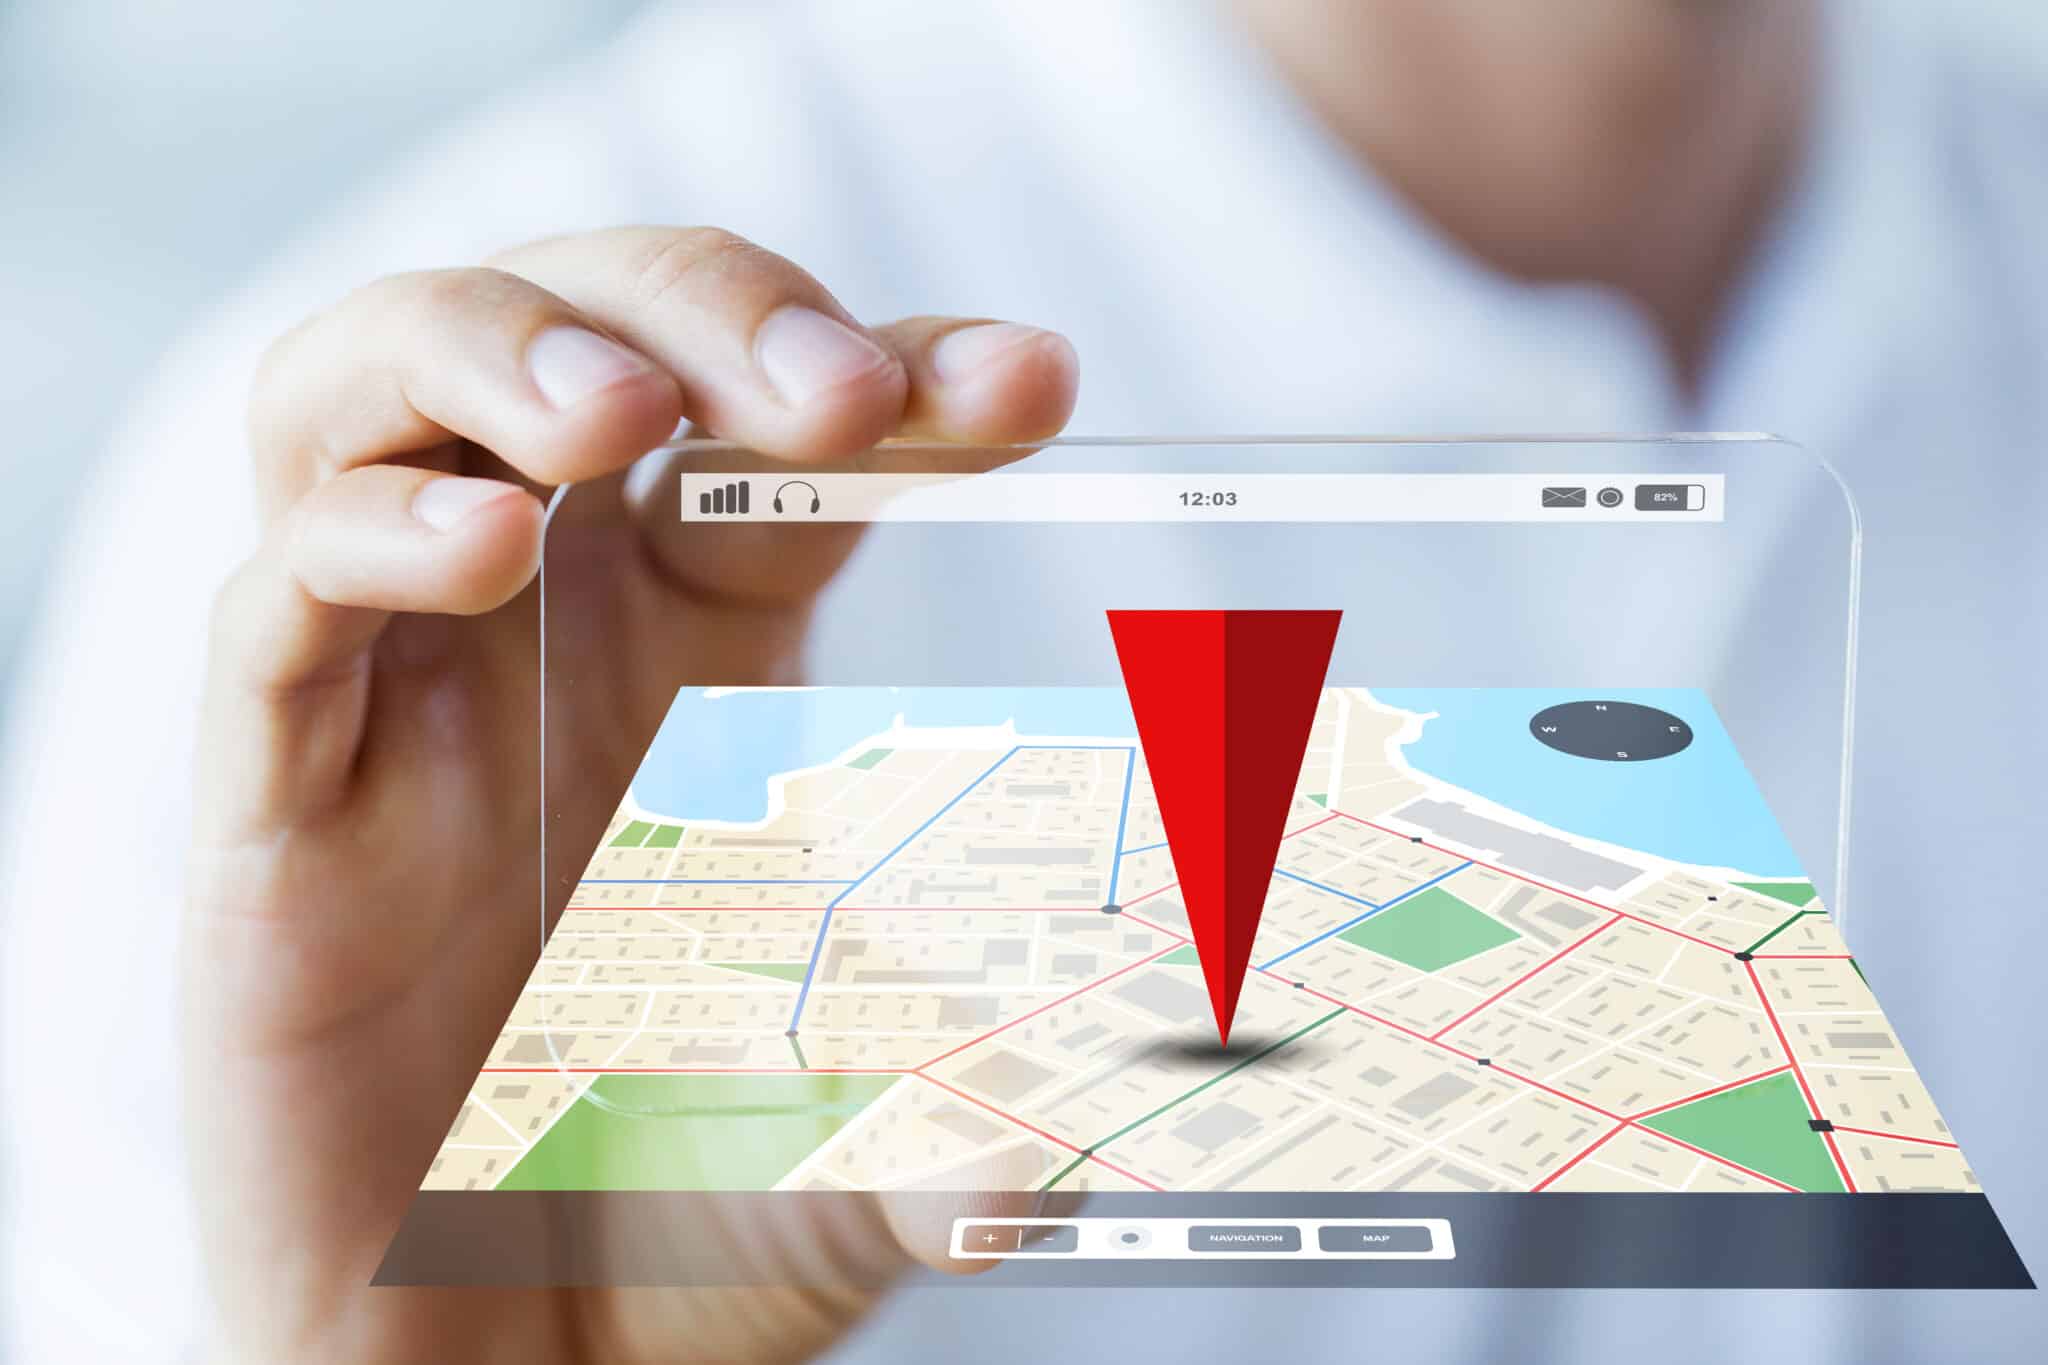 is dr fone virtual location safe